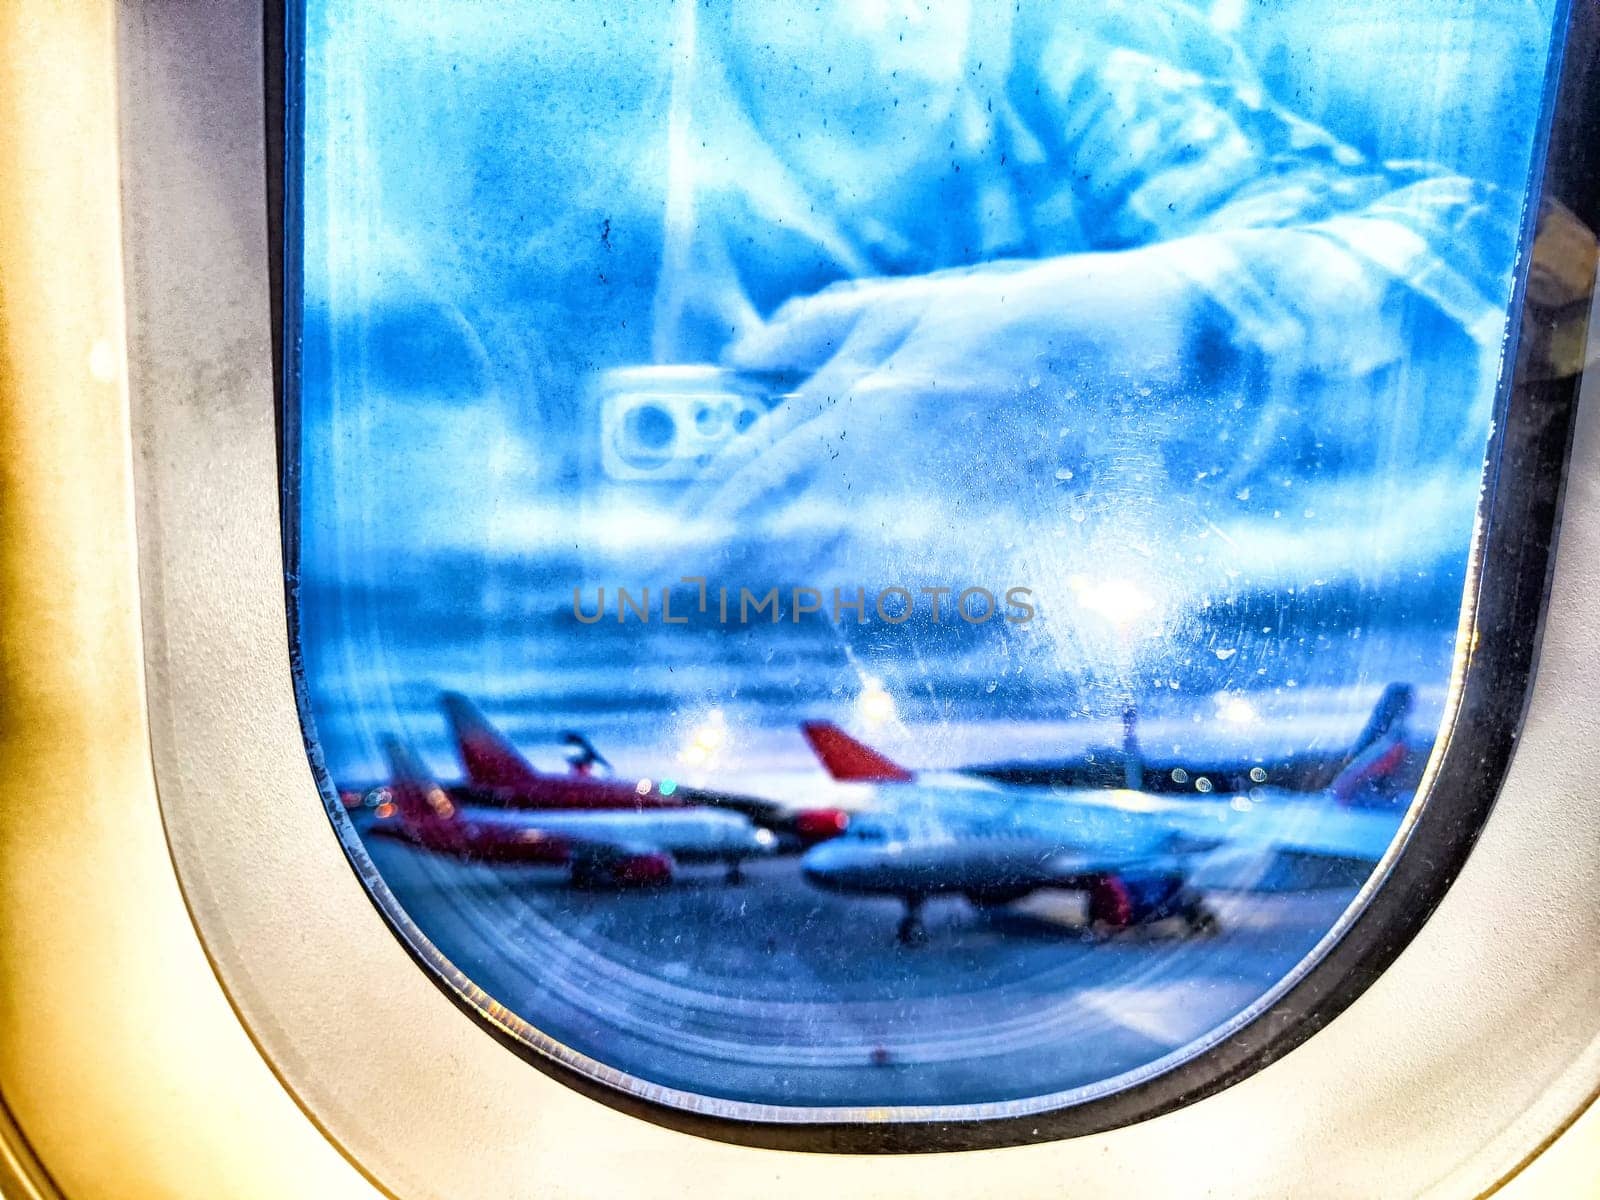 View of the planes at the airport. Airplanes on Tarmac Seen Through Airplane Window at Dusk. Airplanes lined up. Blurred by keleny